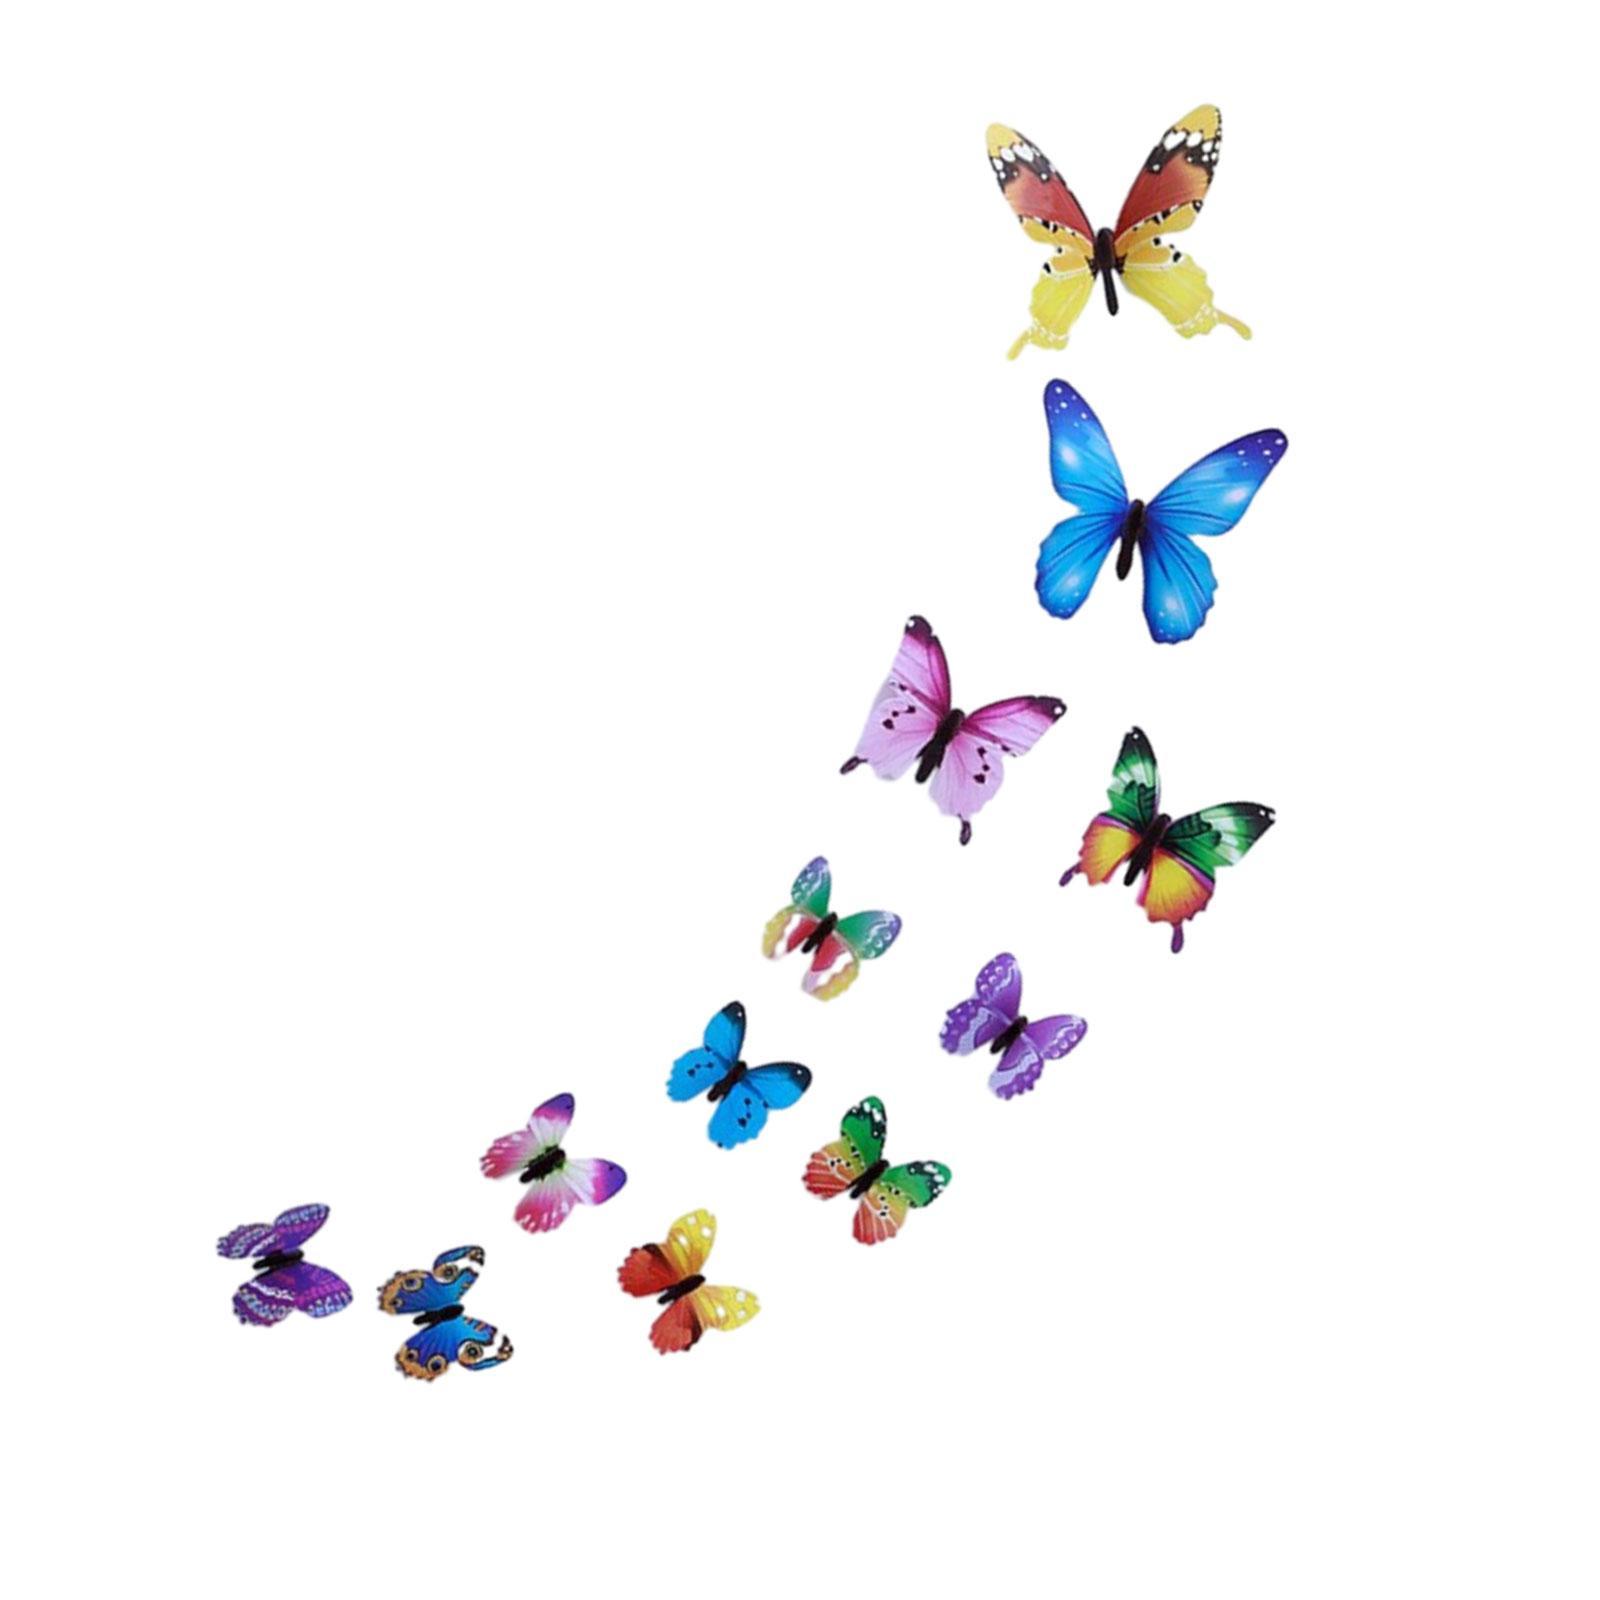 12Pcs 3D Luminous Butterfly Wall Stickers DIY Art Wall Mural Decorative Easy to Use Wall Decoration for Bedroom Sofa Backdrop